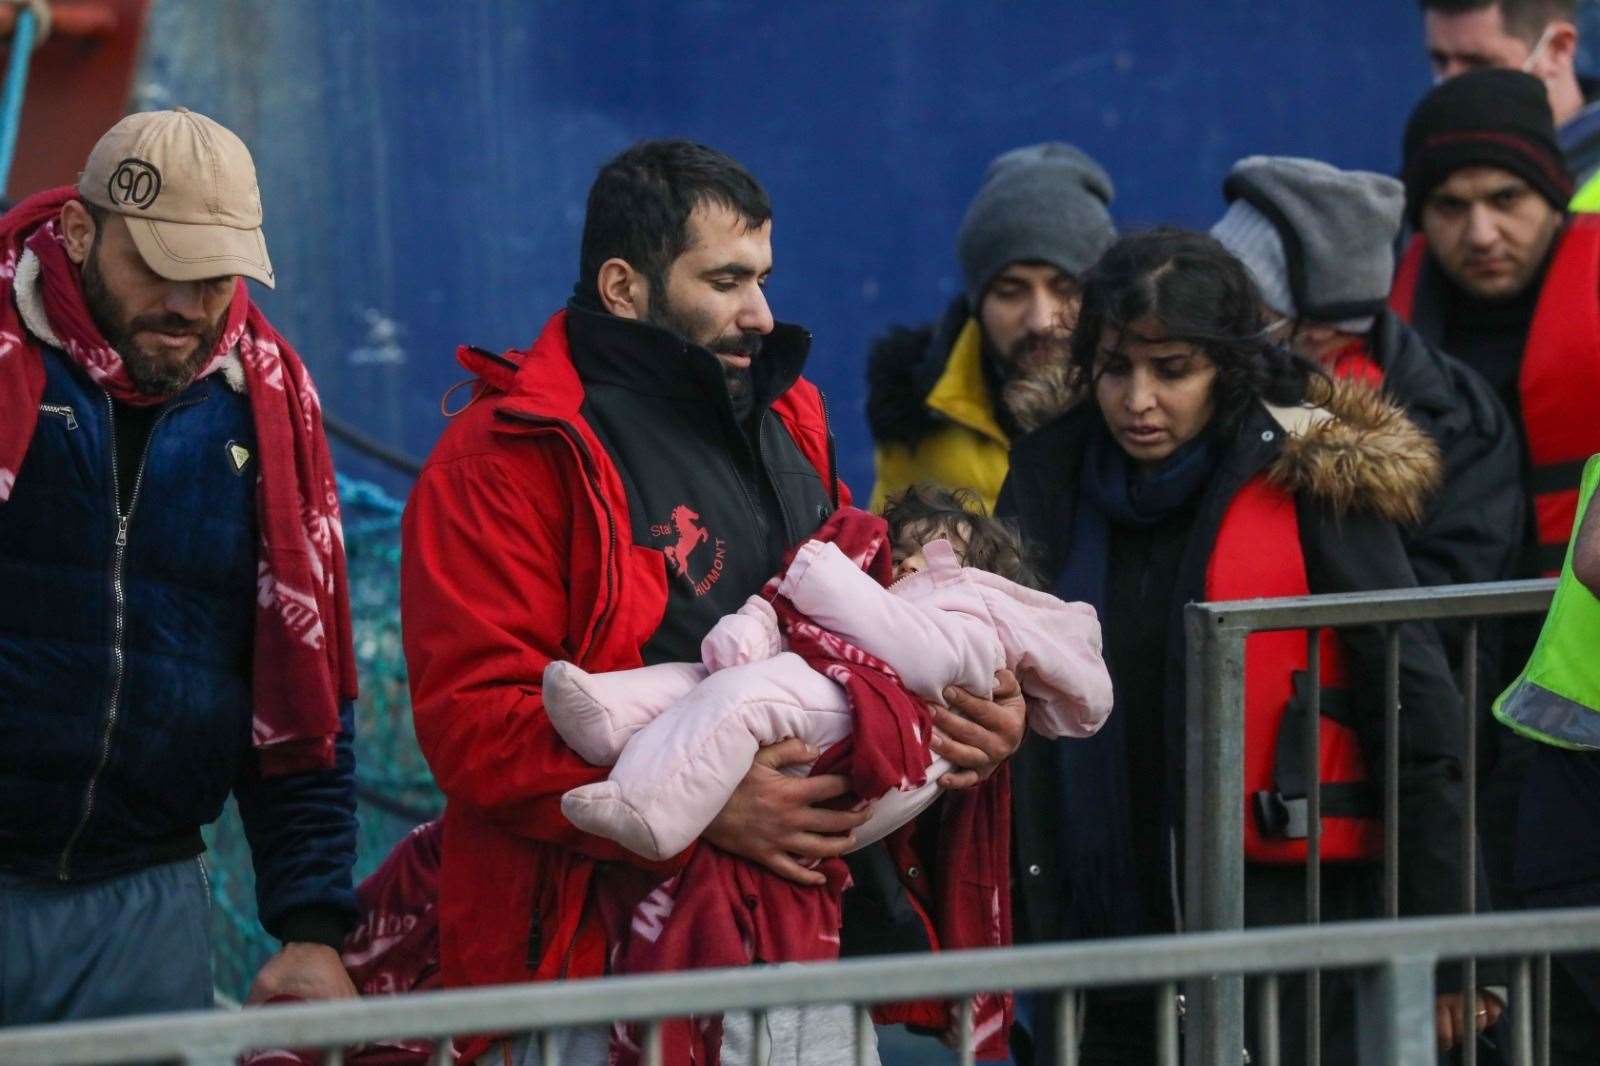 A tiny girl was among a group of asylum seekers brought in during January 2022. Picture: UKNIP